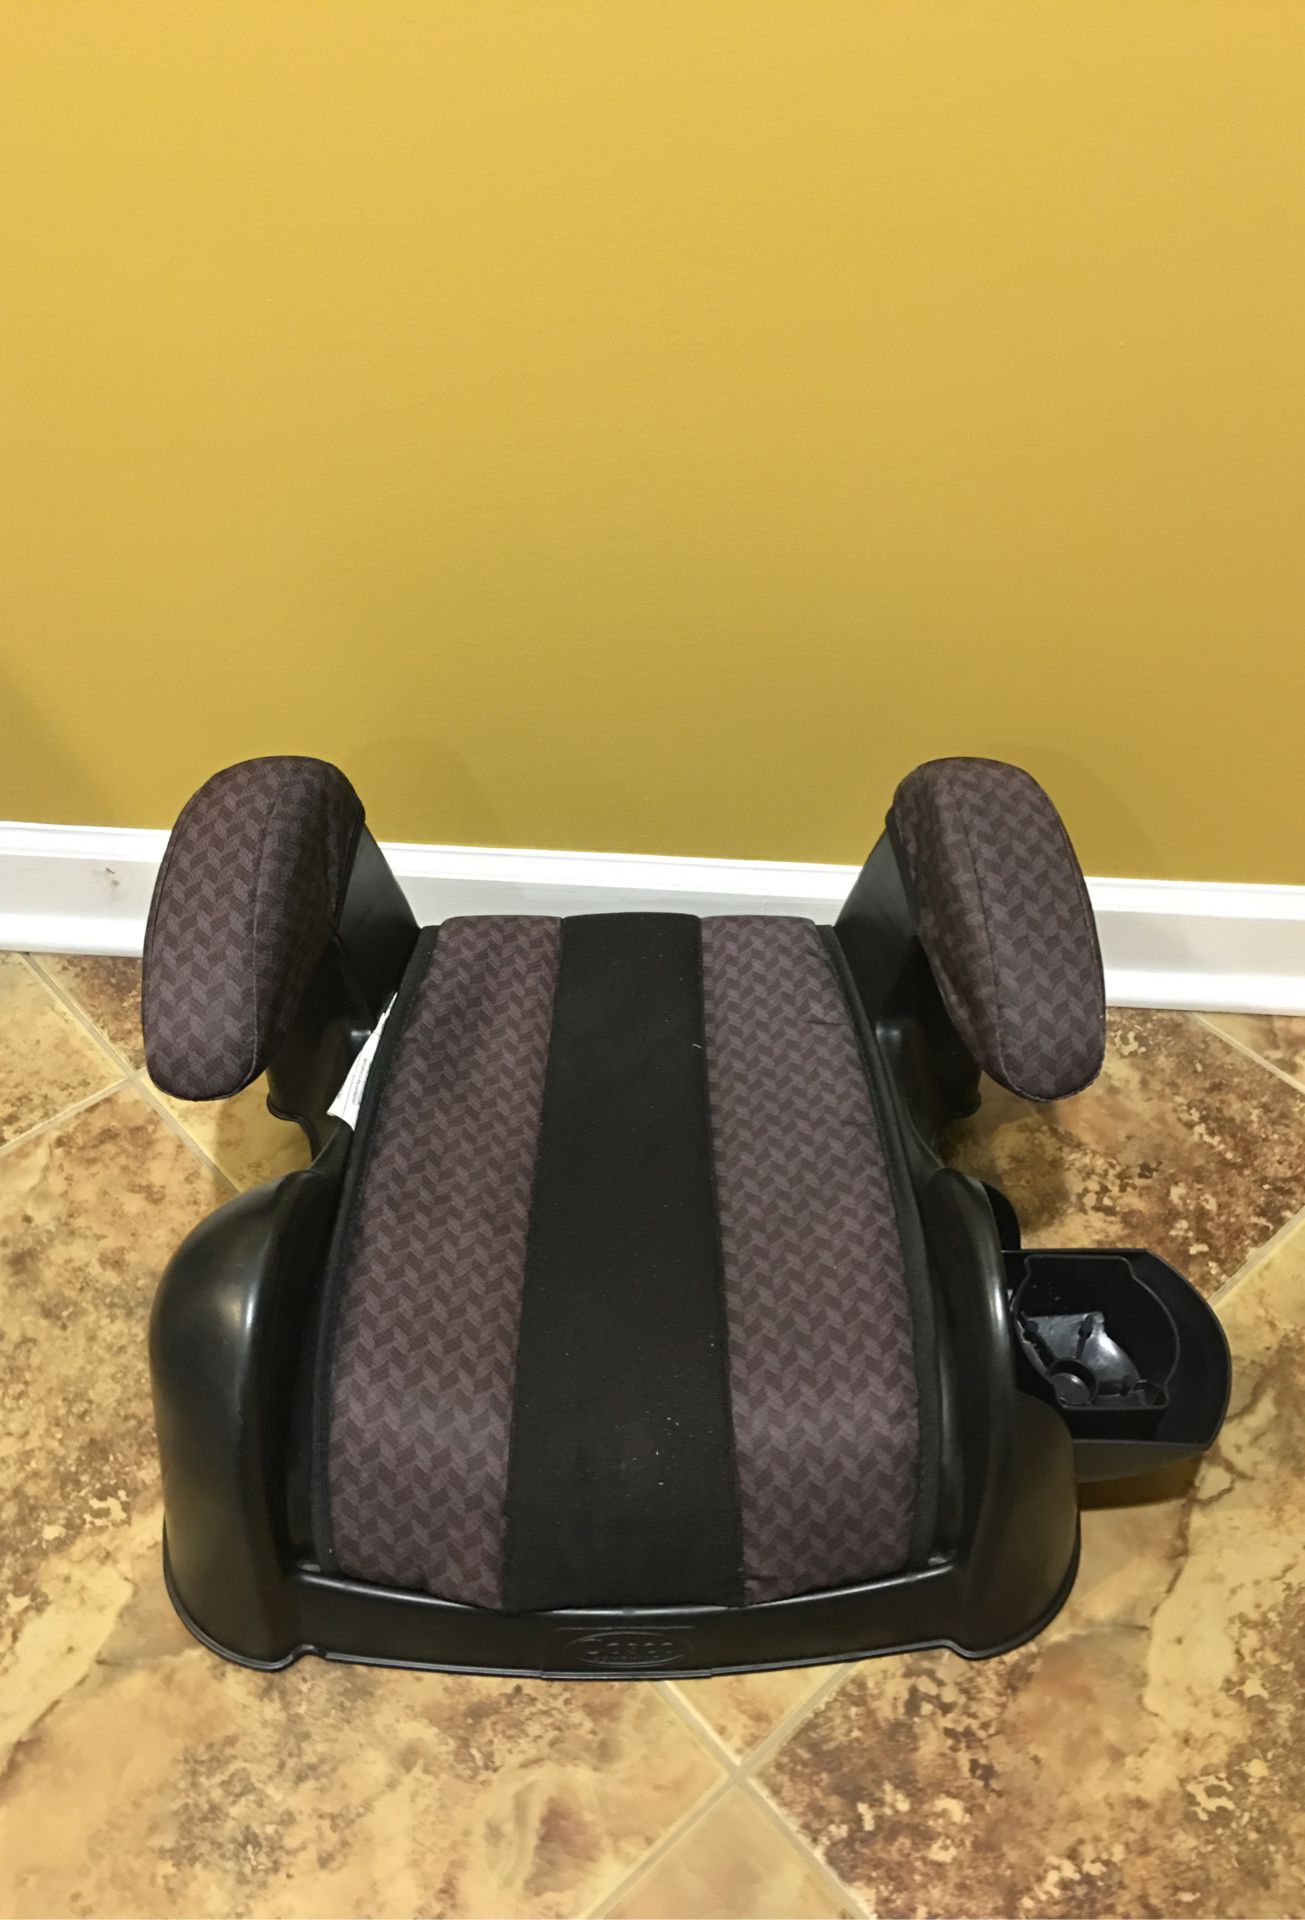 Cosco car seat booster